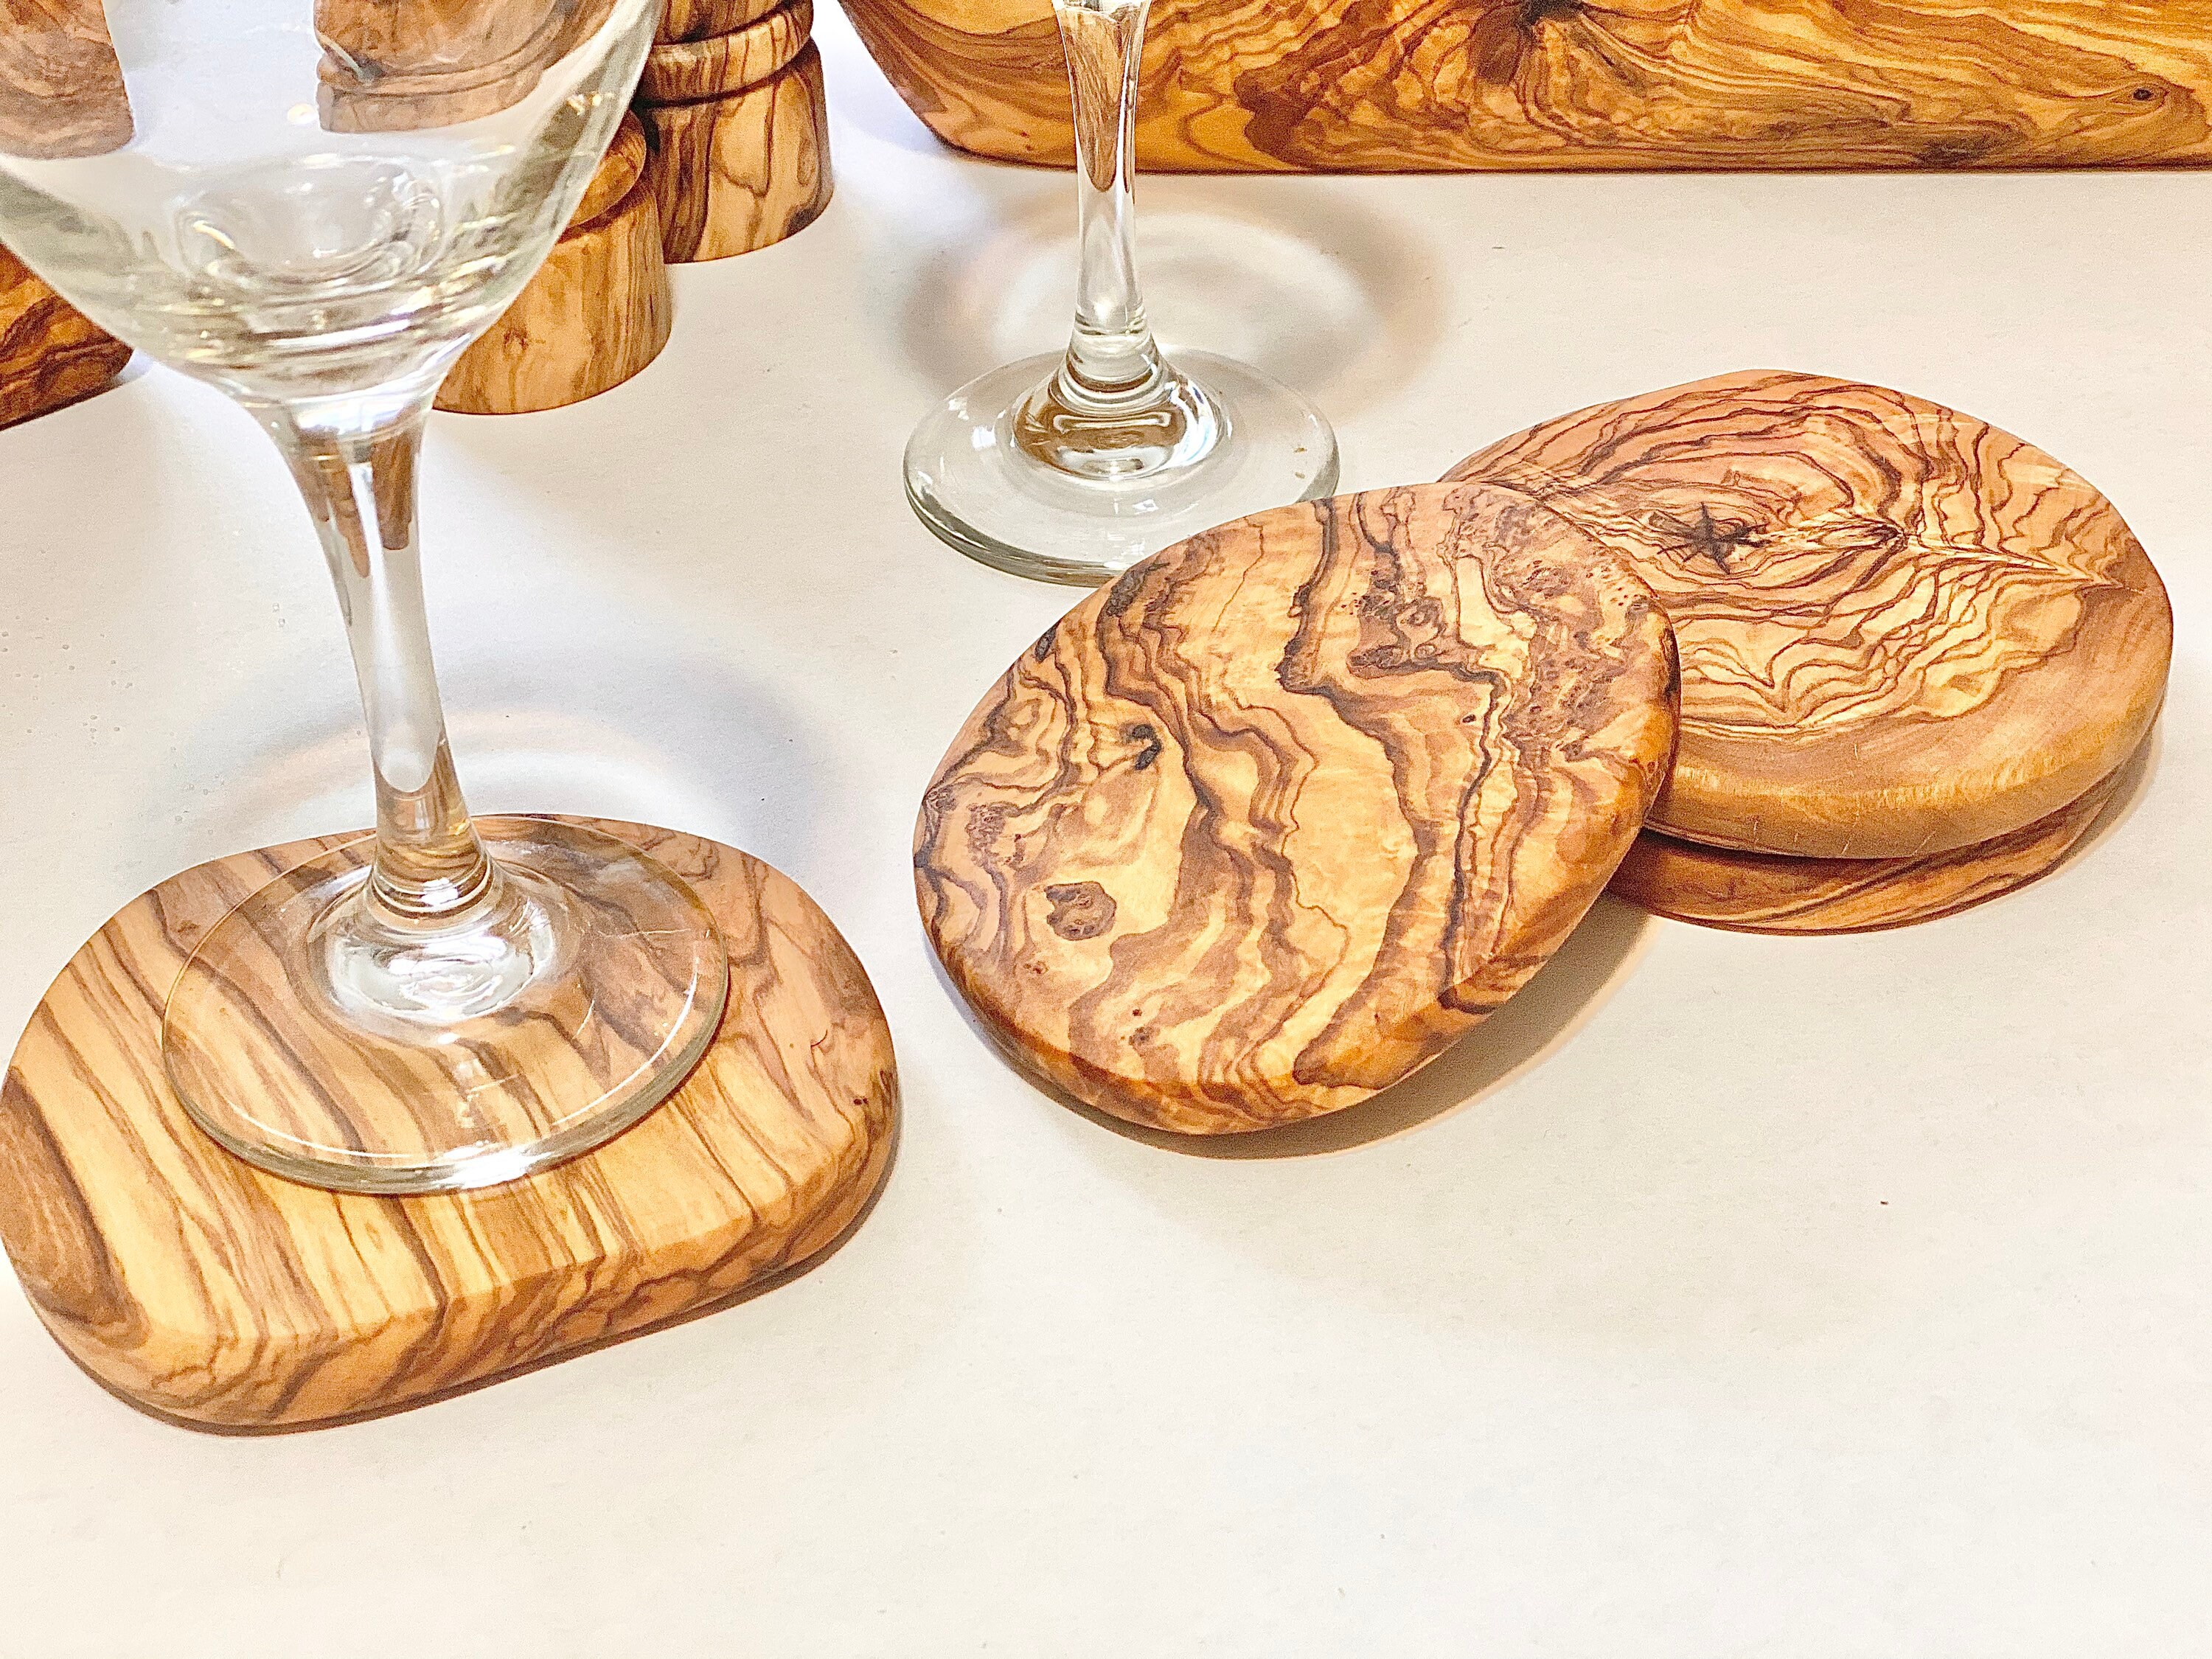 Apolizon,Coasters For Drinks(Set of 4),Wooden Coasters For Wooden